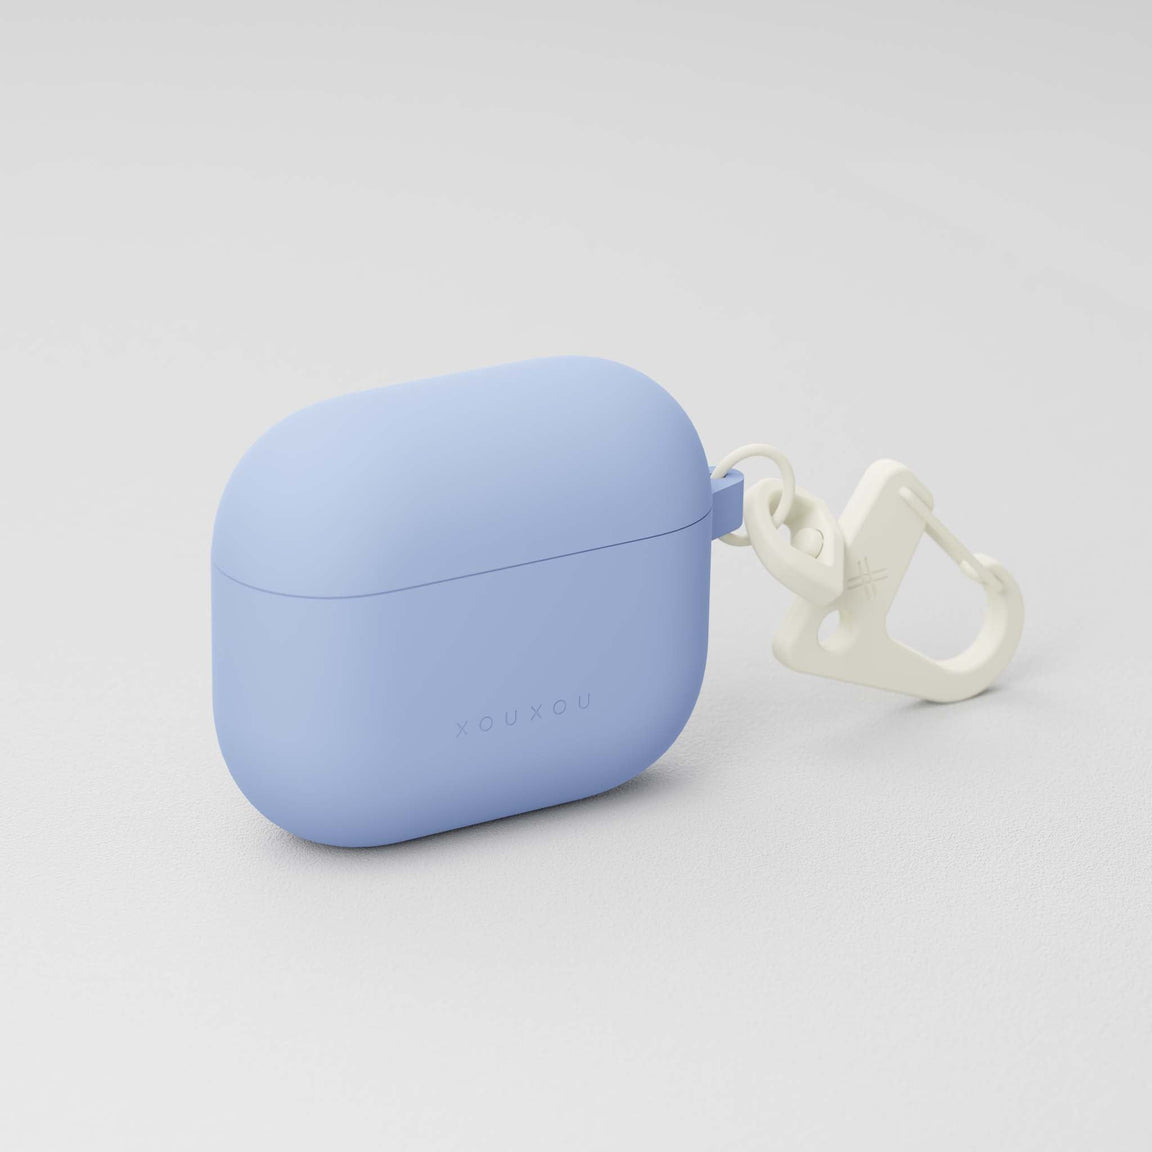 Apple AirPods case 3rd generation in Baby Blue with carabiner hook | XOUXOU